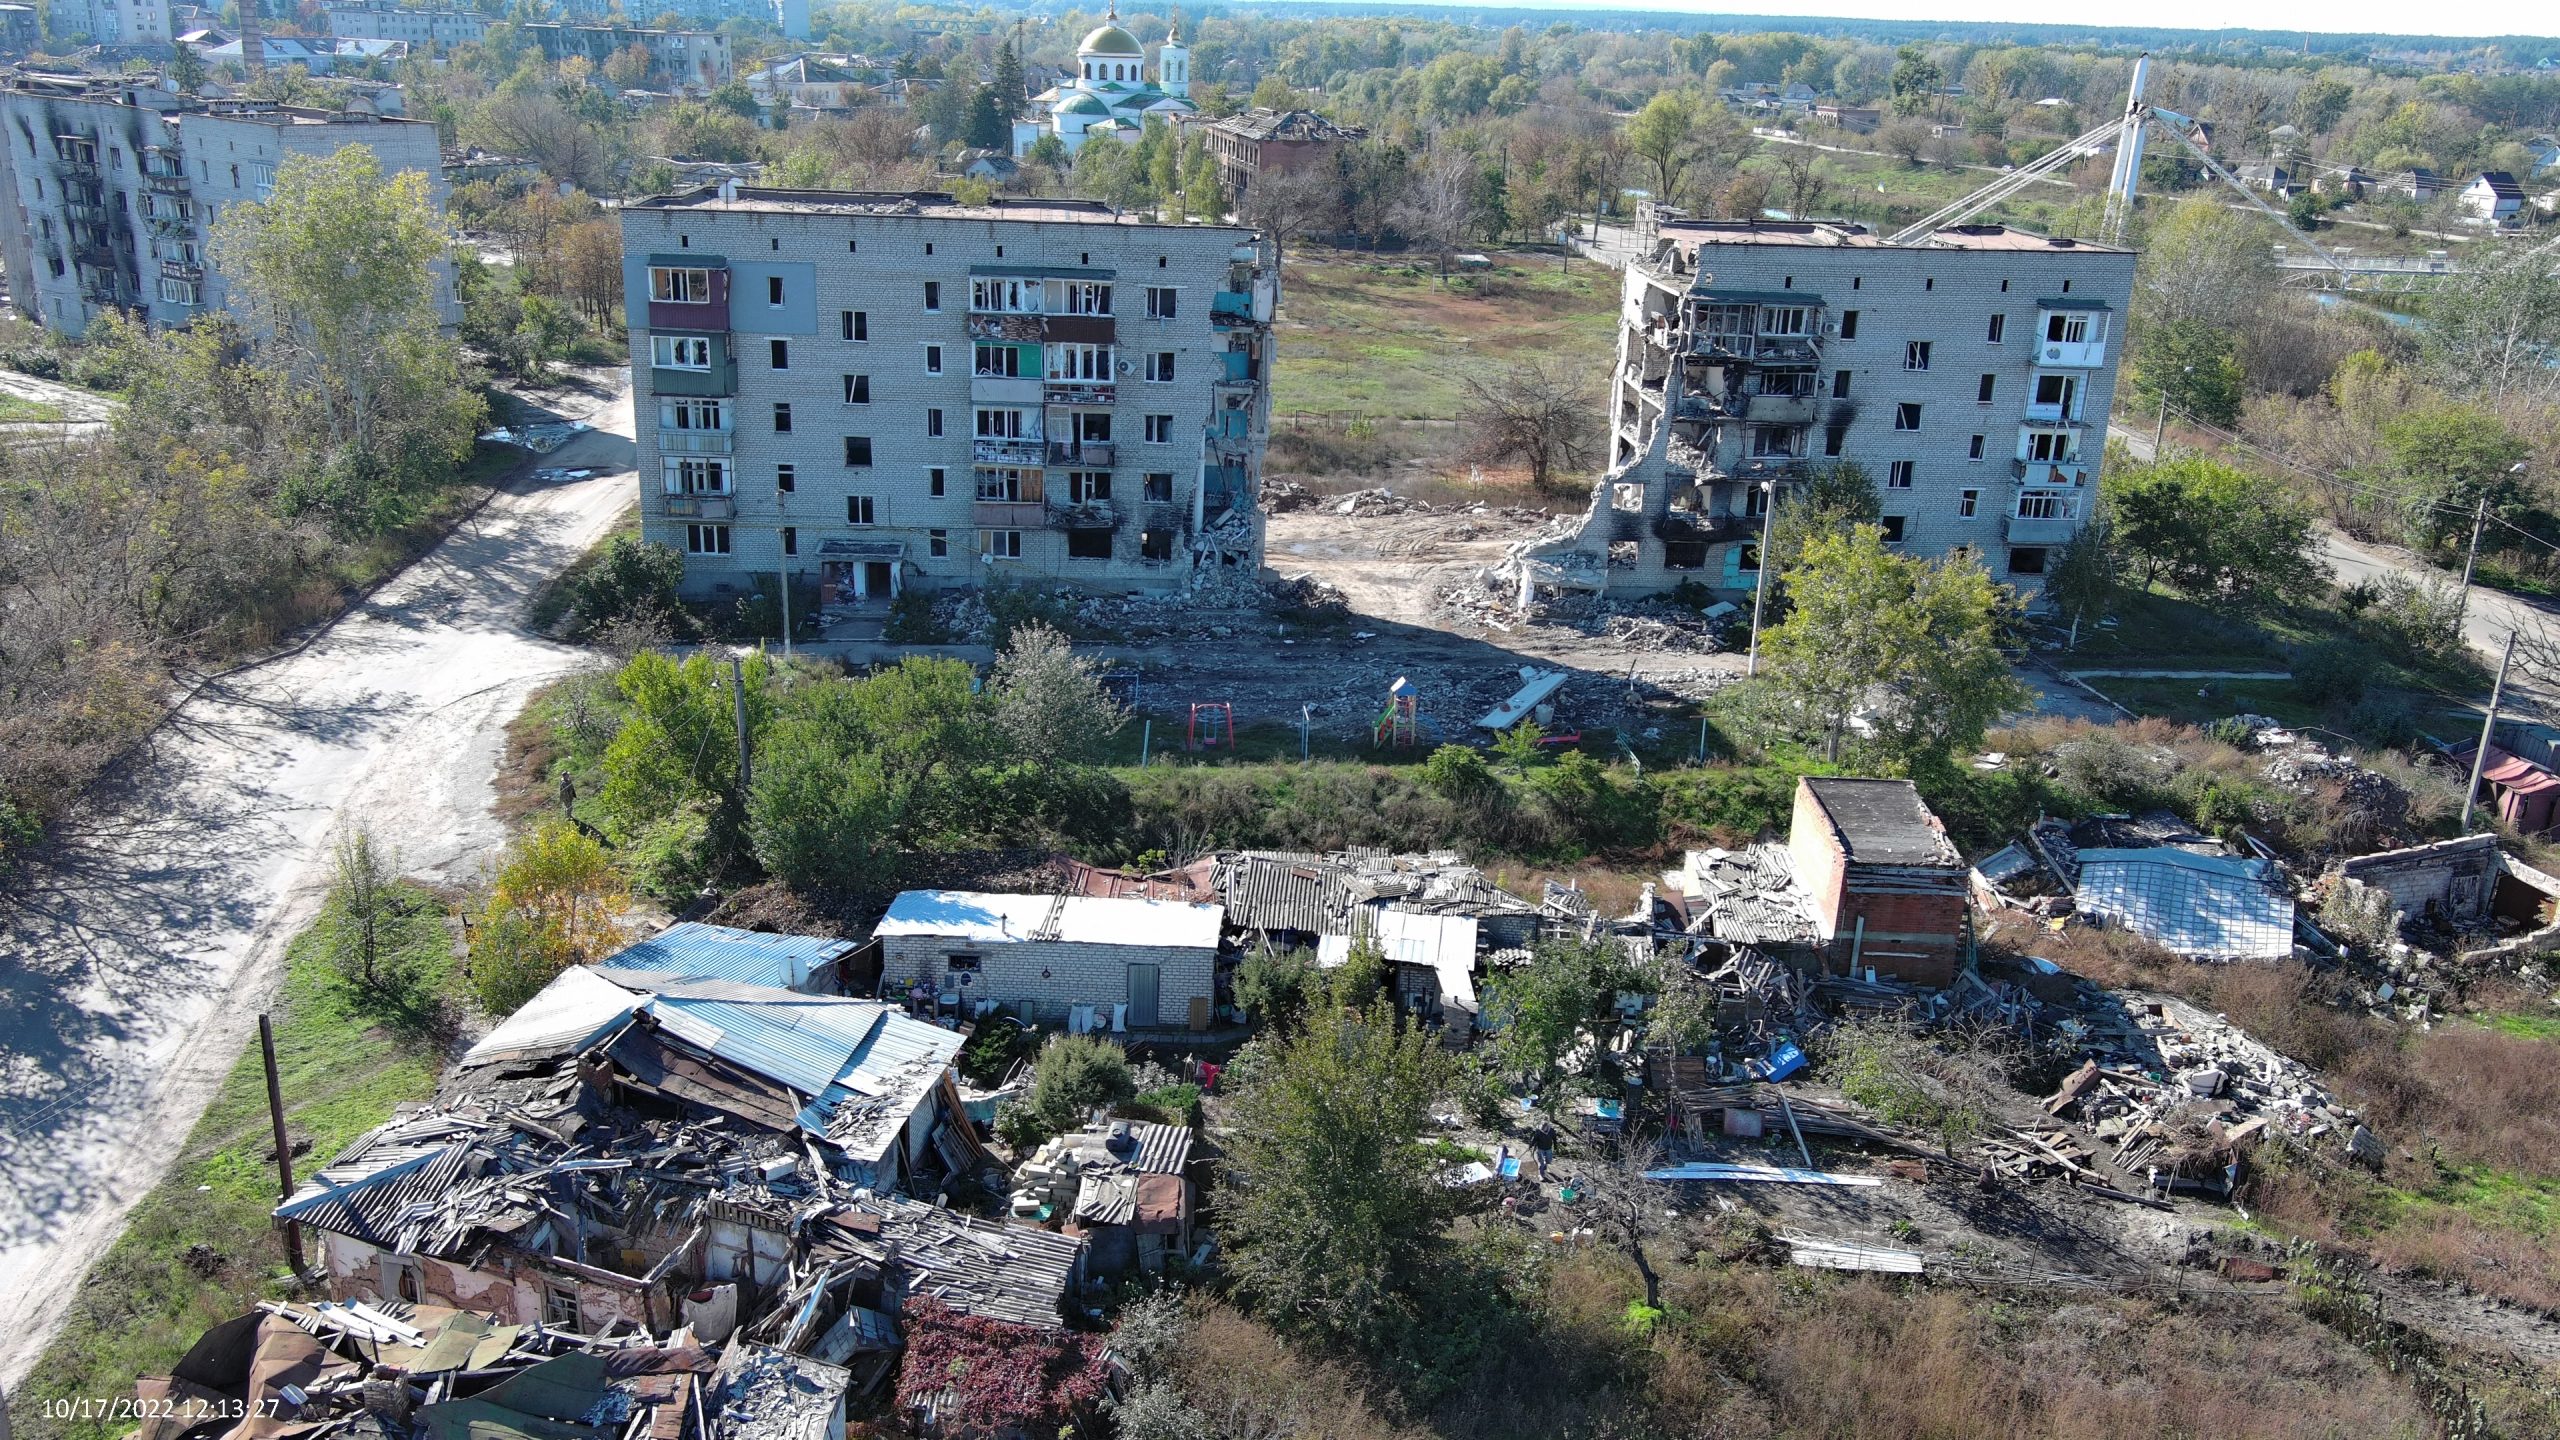 Izyum, Pokrovska Street 3. 44 people were killed there. As seen from the drone on Oct 17, 2022. Photo by Yevhen Tytarenko.